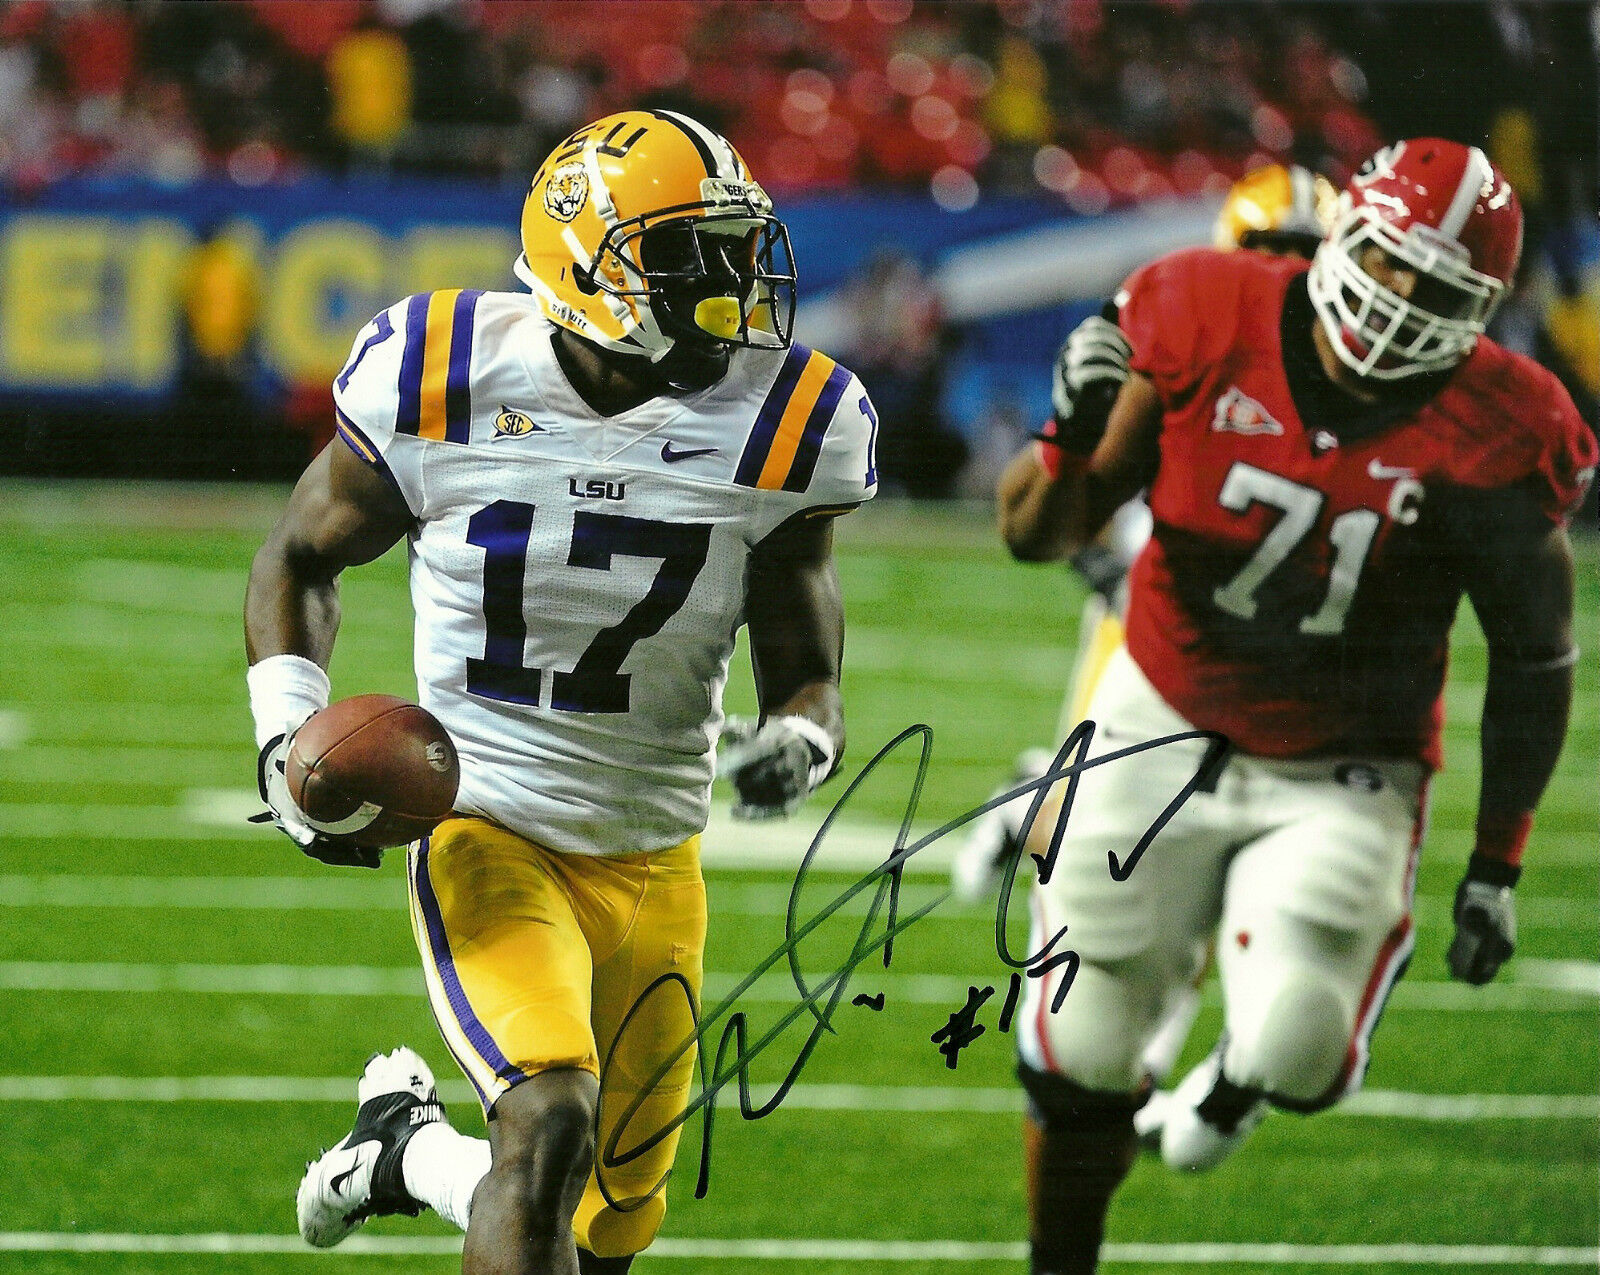 DALLAS COWBOYS MORRIS CLAIBORNE HAND SIGNED LSU TIGERS 8X10 Photo Poster painting W/COA